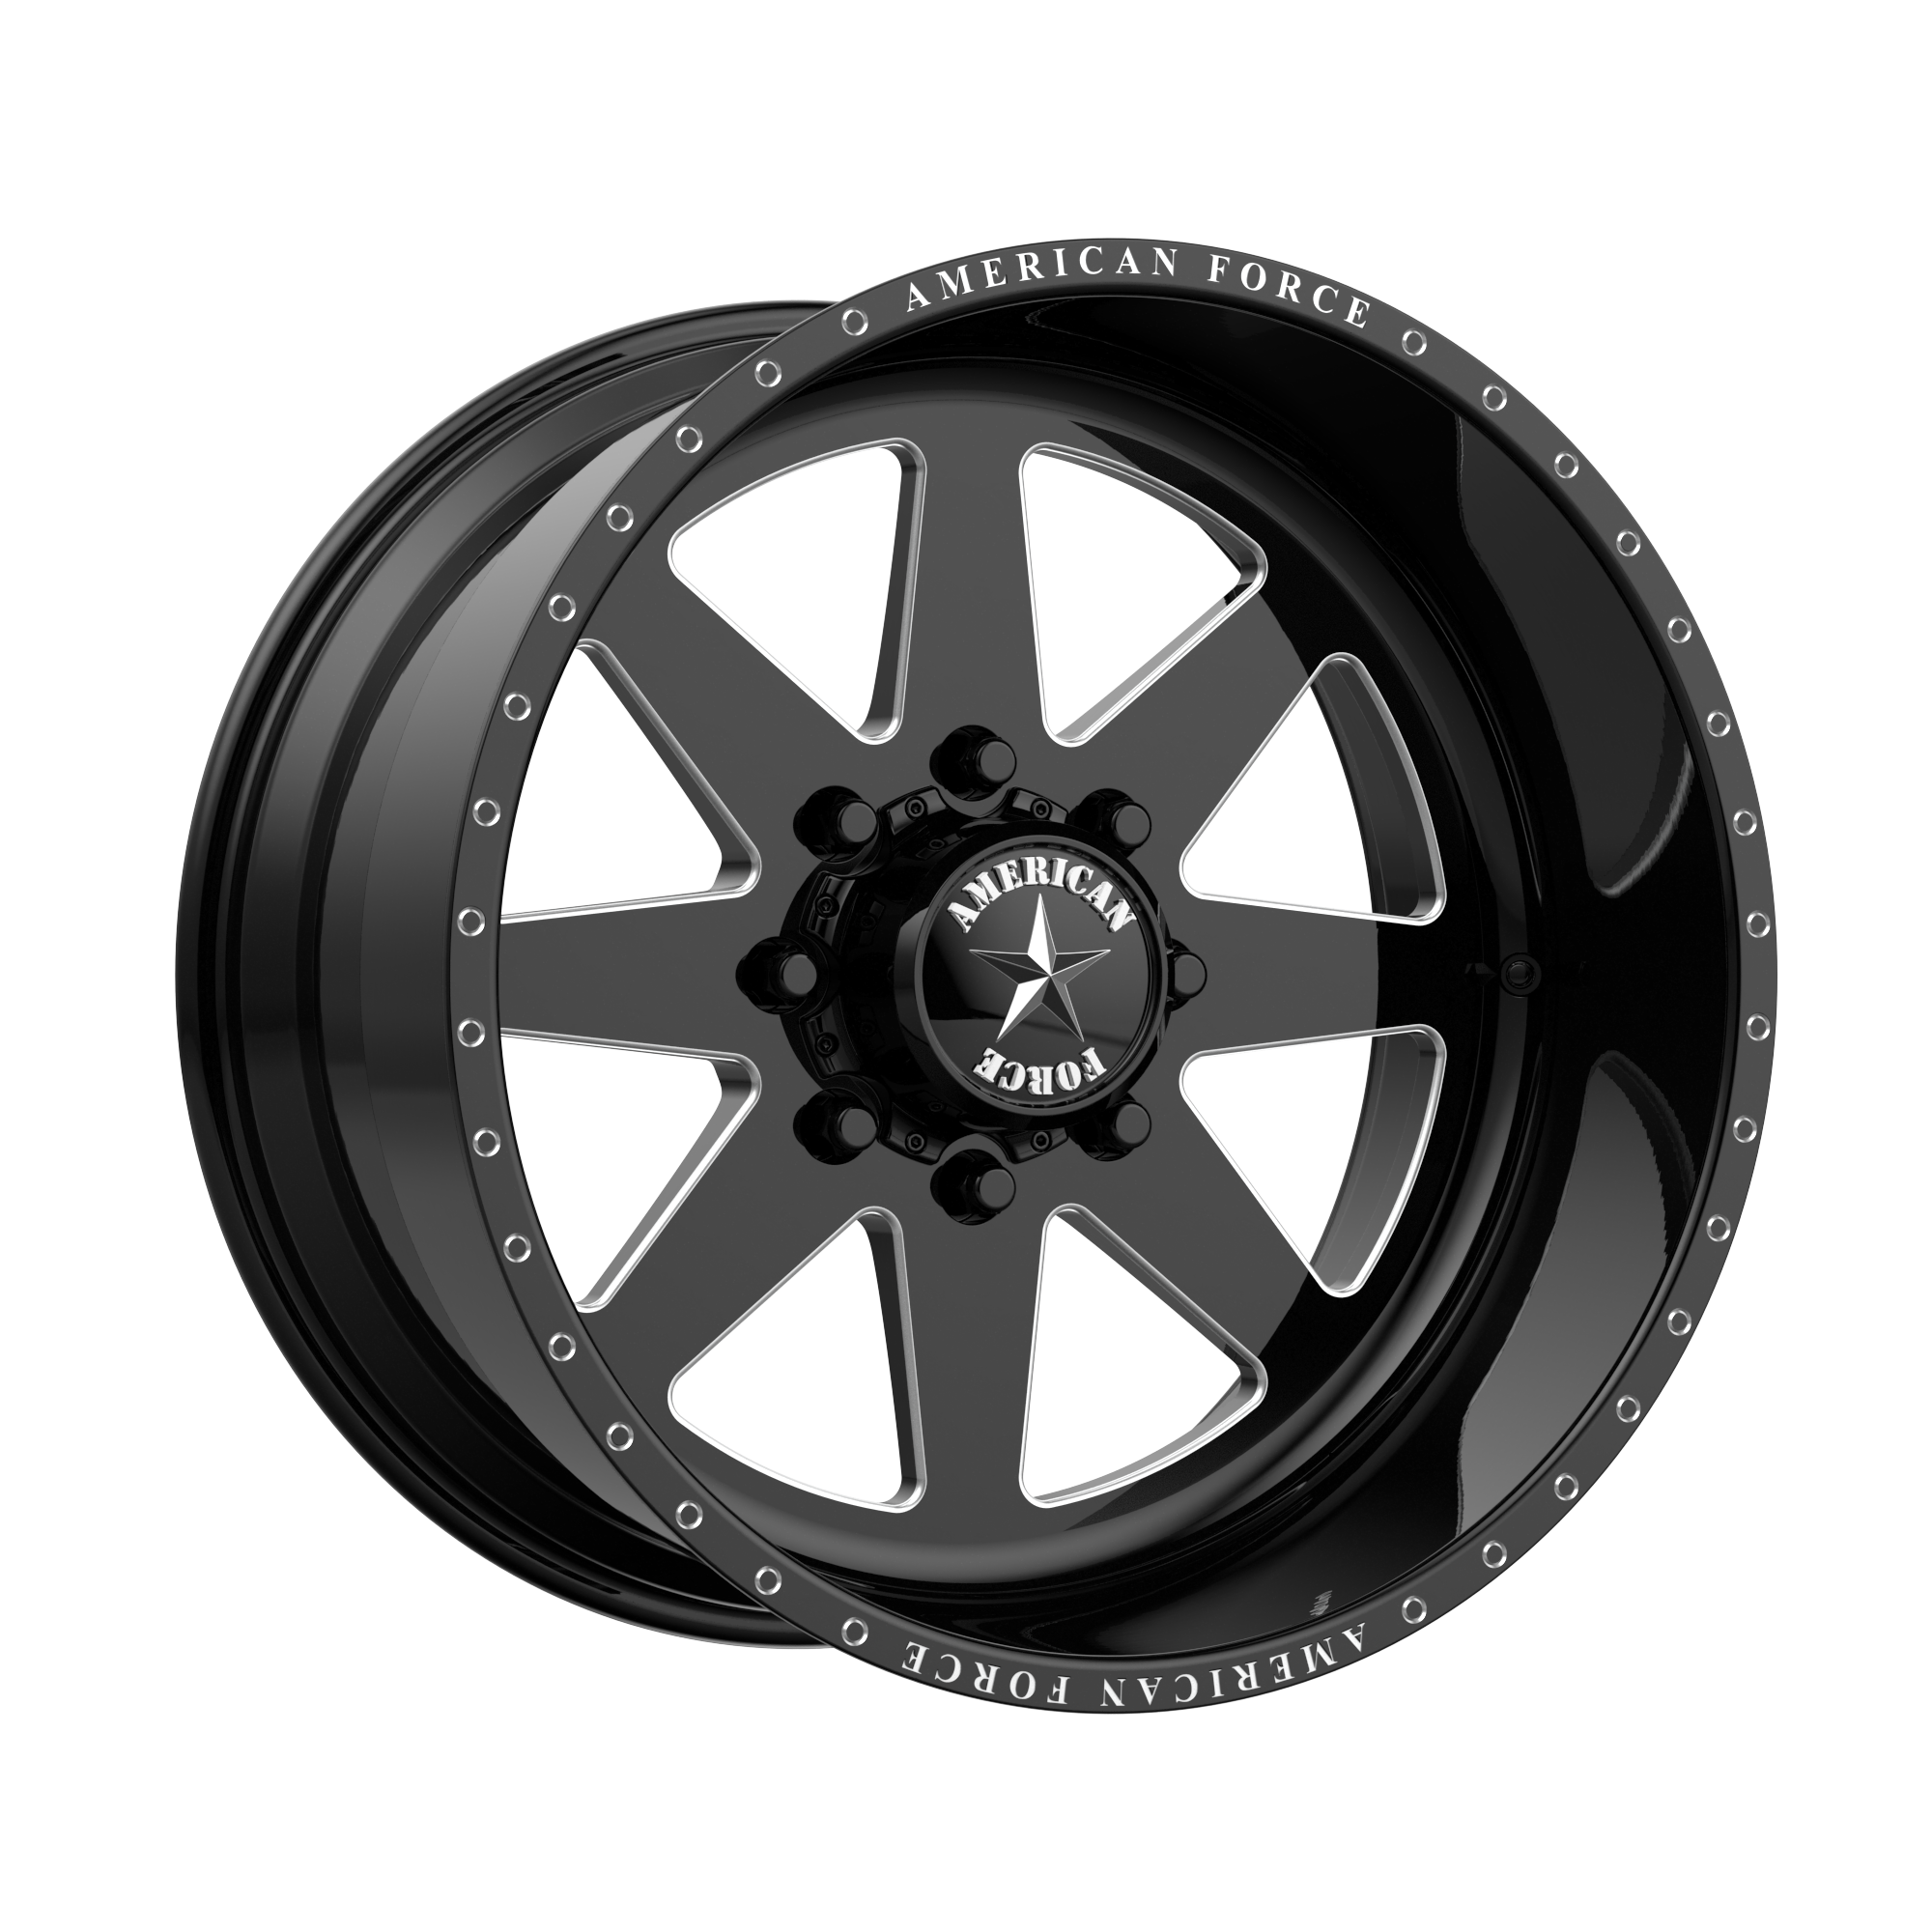 INDEPENDENCE SS 20x9 6x135.00 GLOSS BLACK MACHINED (0 mm) - Tires and Engine Performance